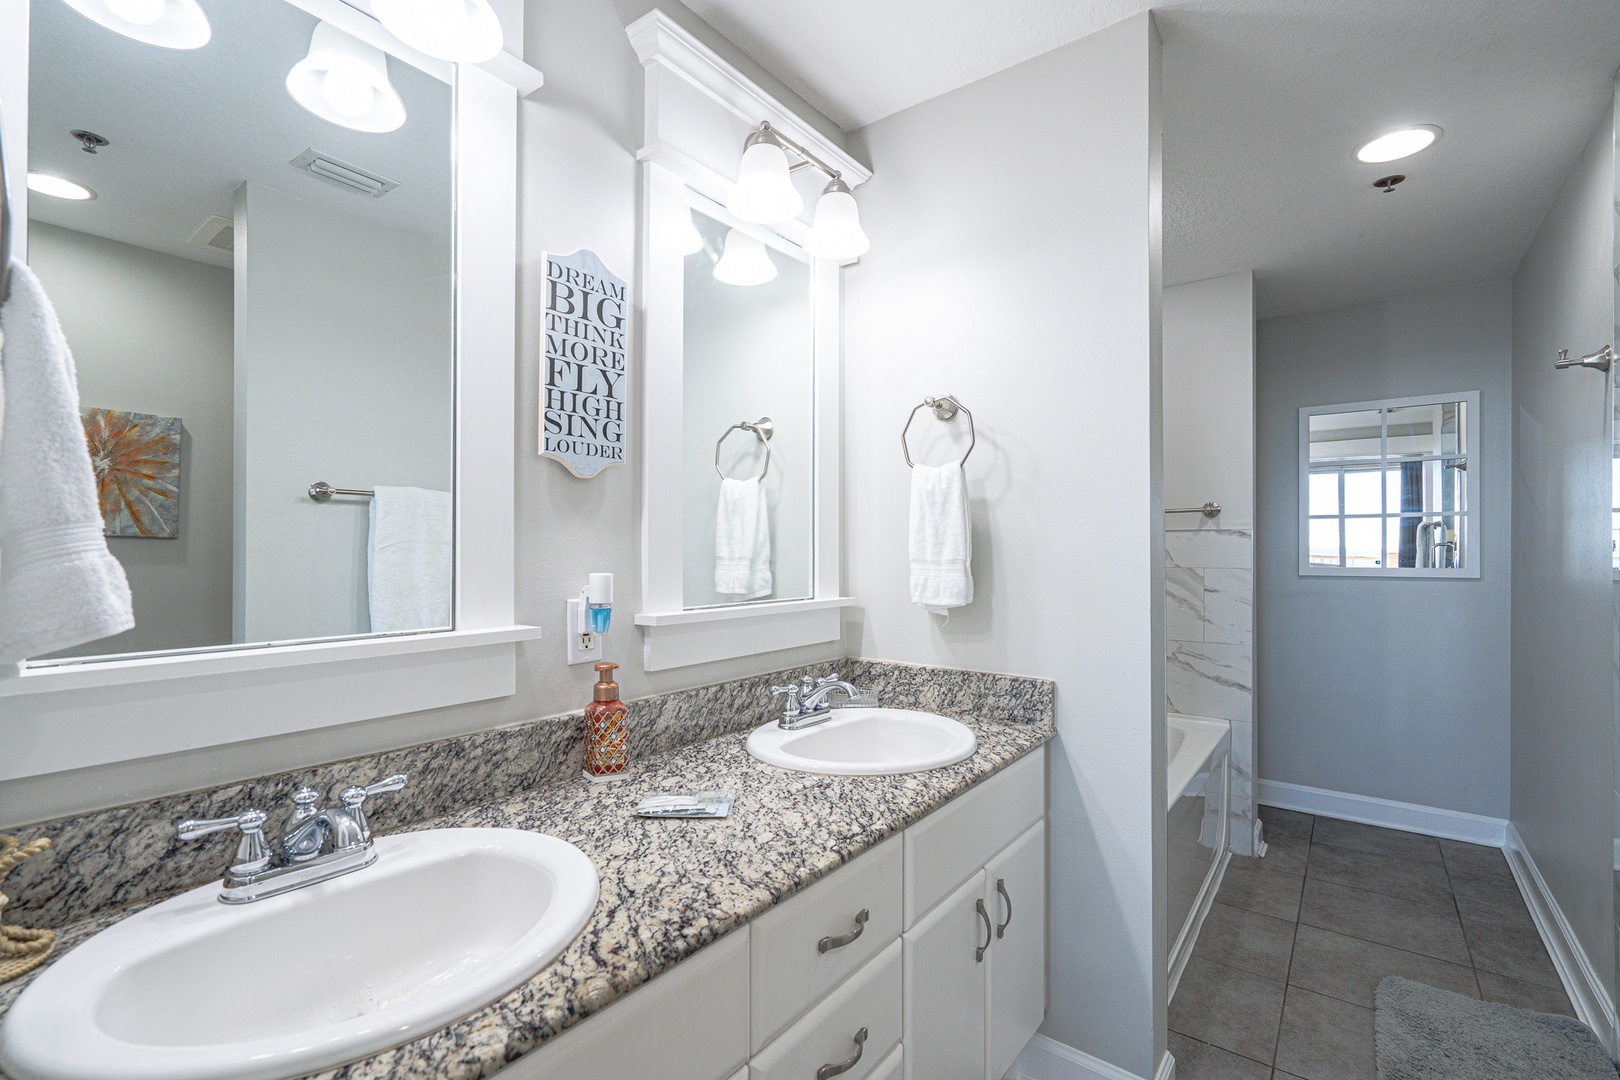 This full ensuite provides a shower, soaking tub and double vanity